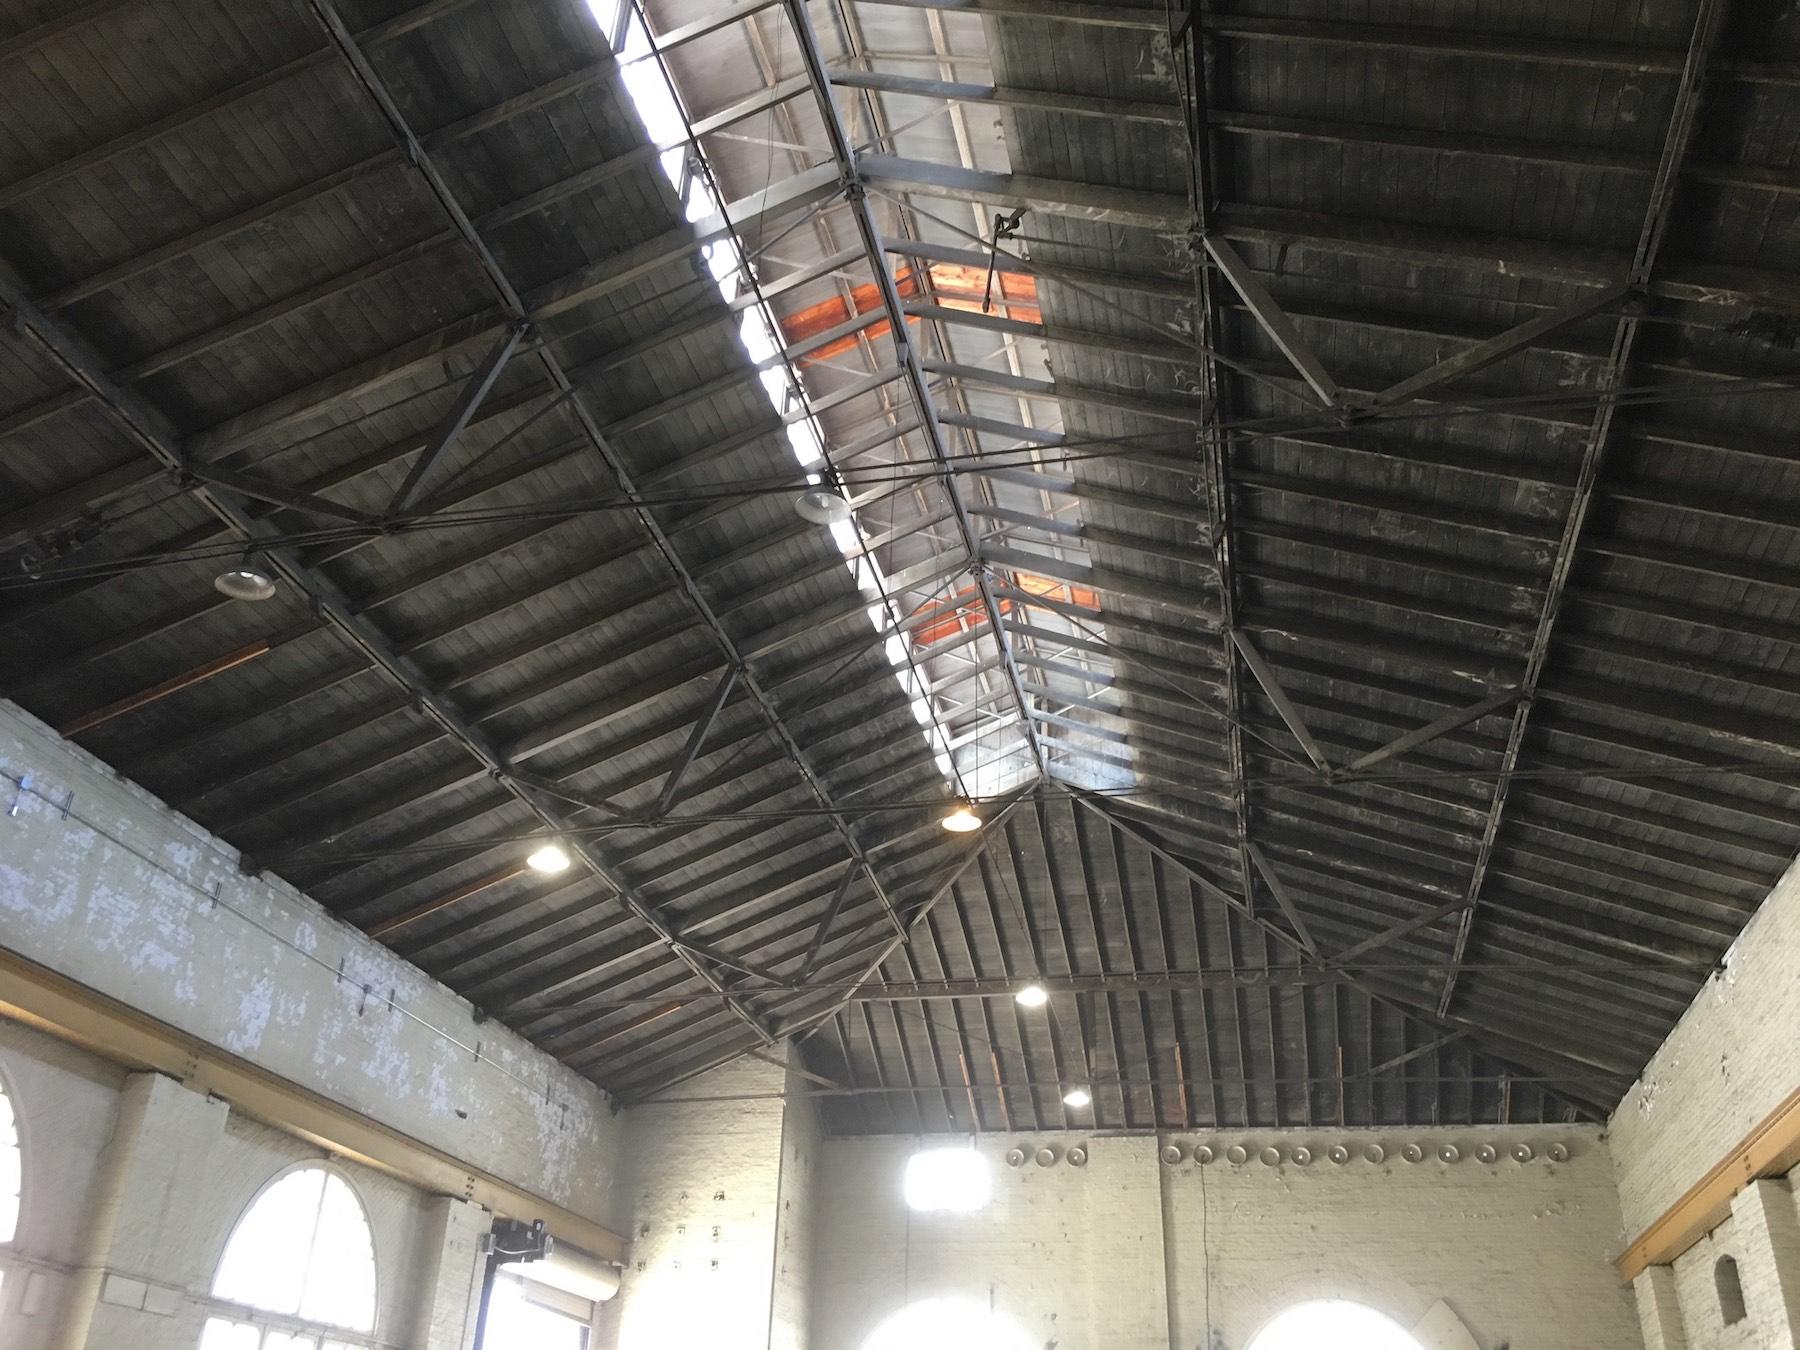 A new truss system is part of the building's seismic resistance.